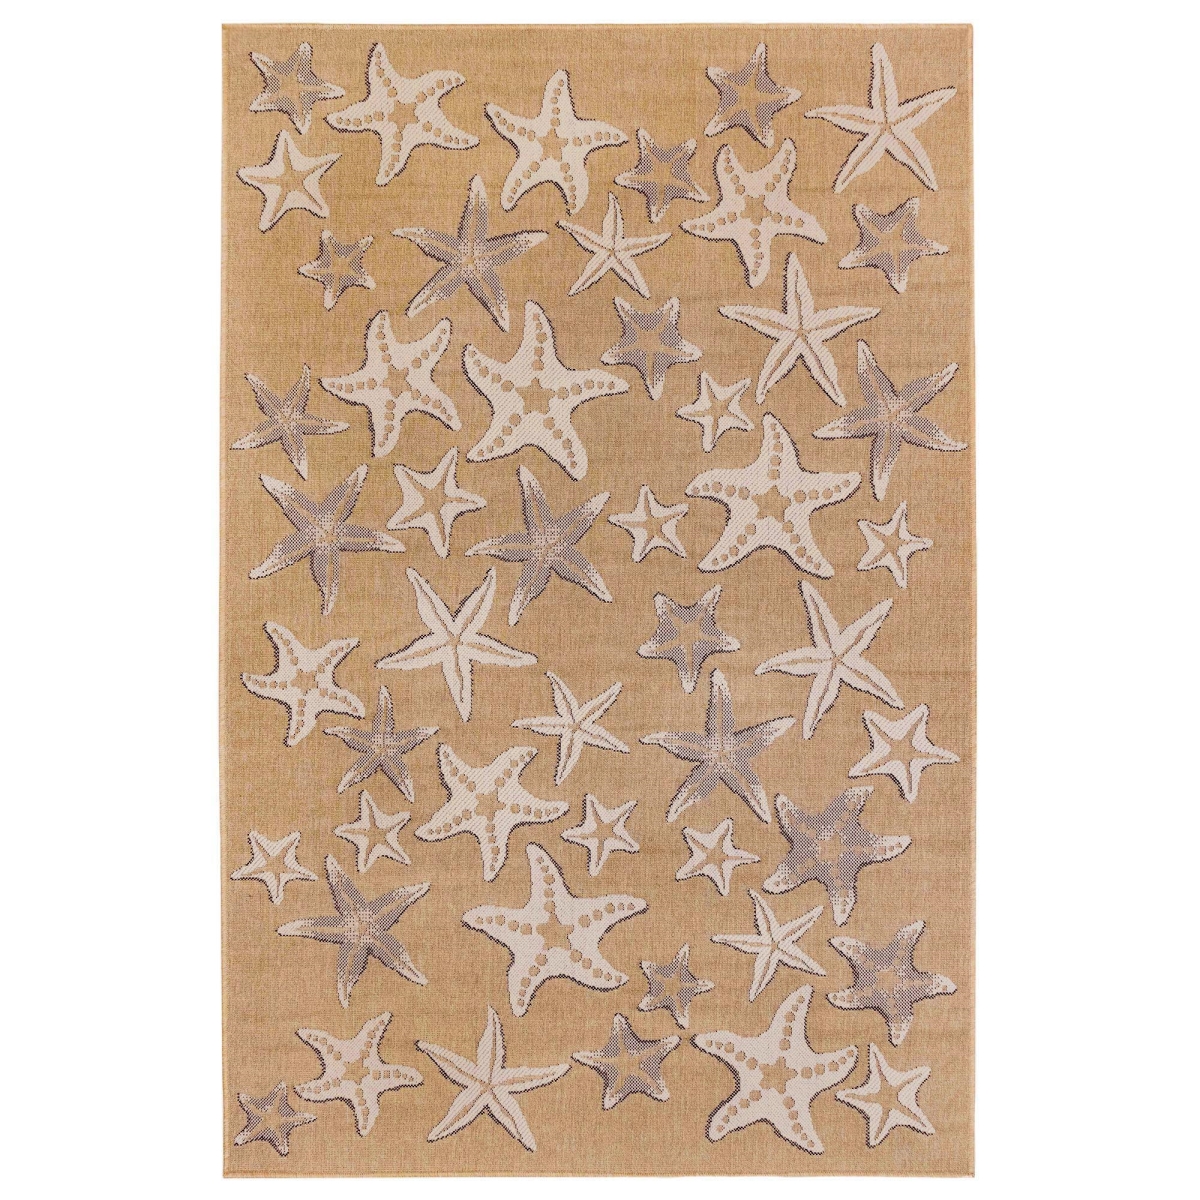 Trans-ocean Imports Cre69841512 6 Ft. 6 In. X 9 Ft. 4 In. Liora Manne Carmel Starfish Indoor & Outdoor Rug Wilton Woven Rectangular Rug - Sand